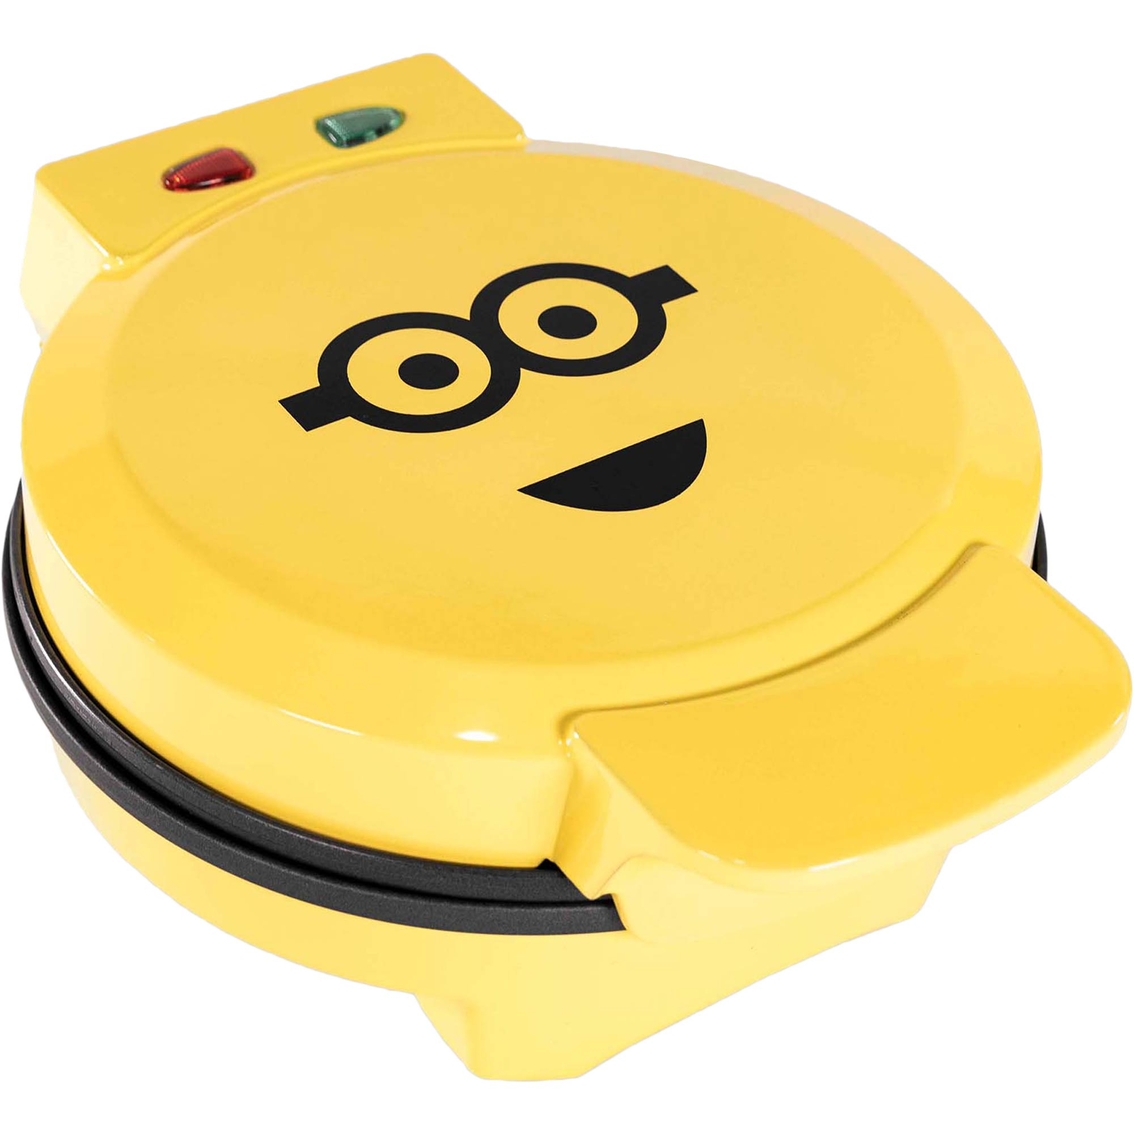 Minions Kevin Round Waffle Maker - Image 2 of 10